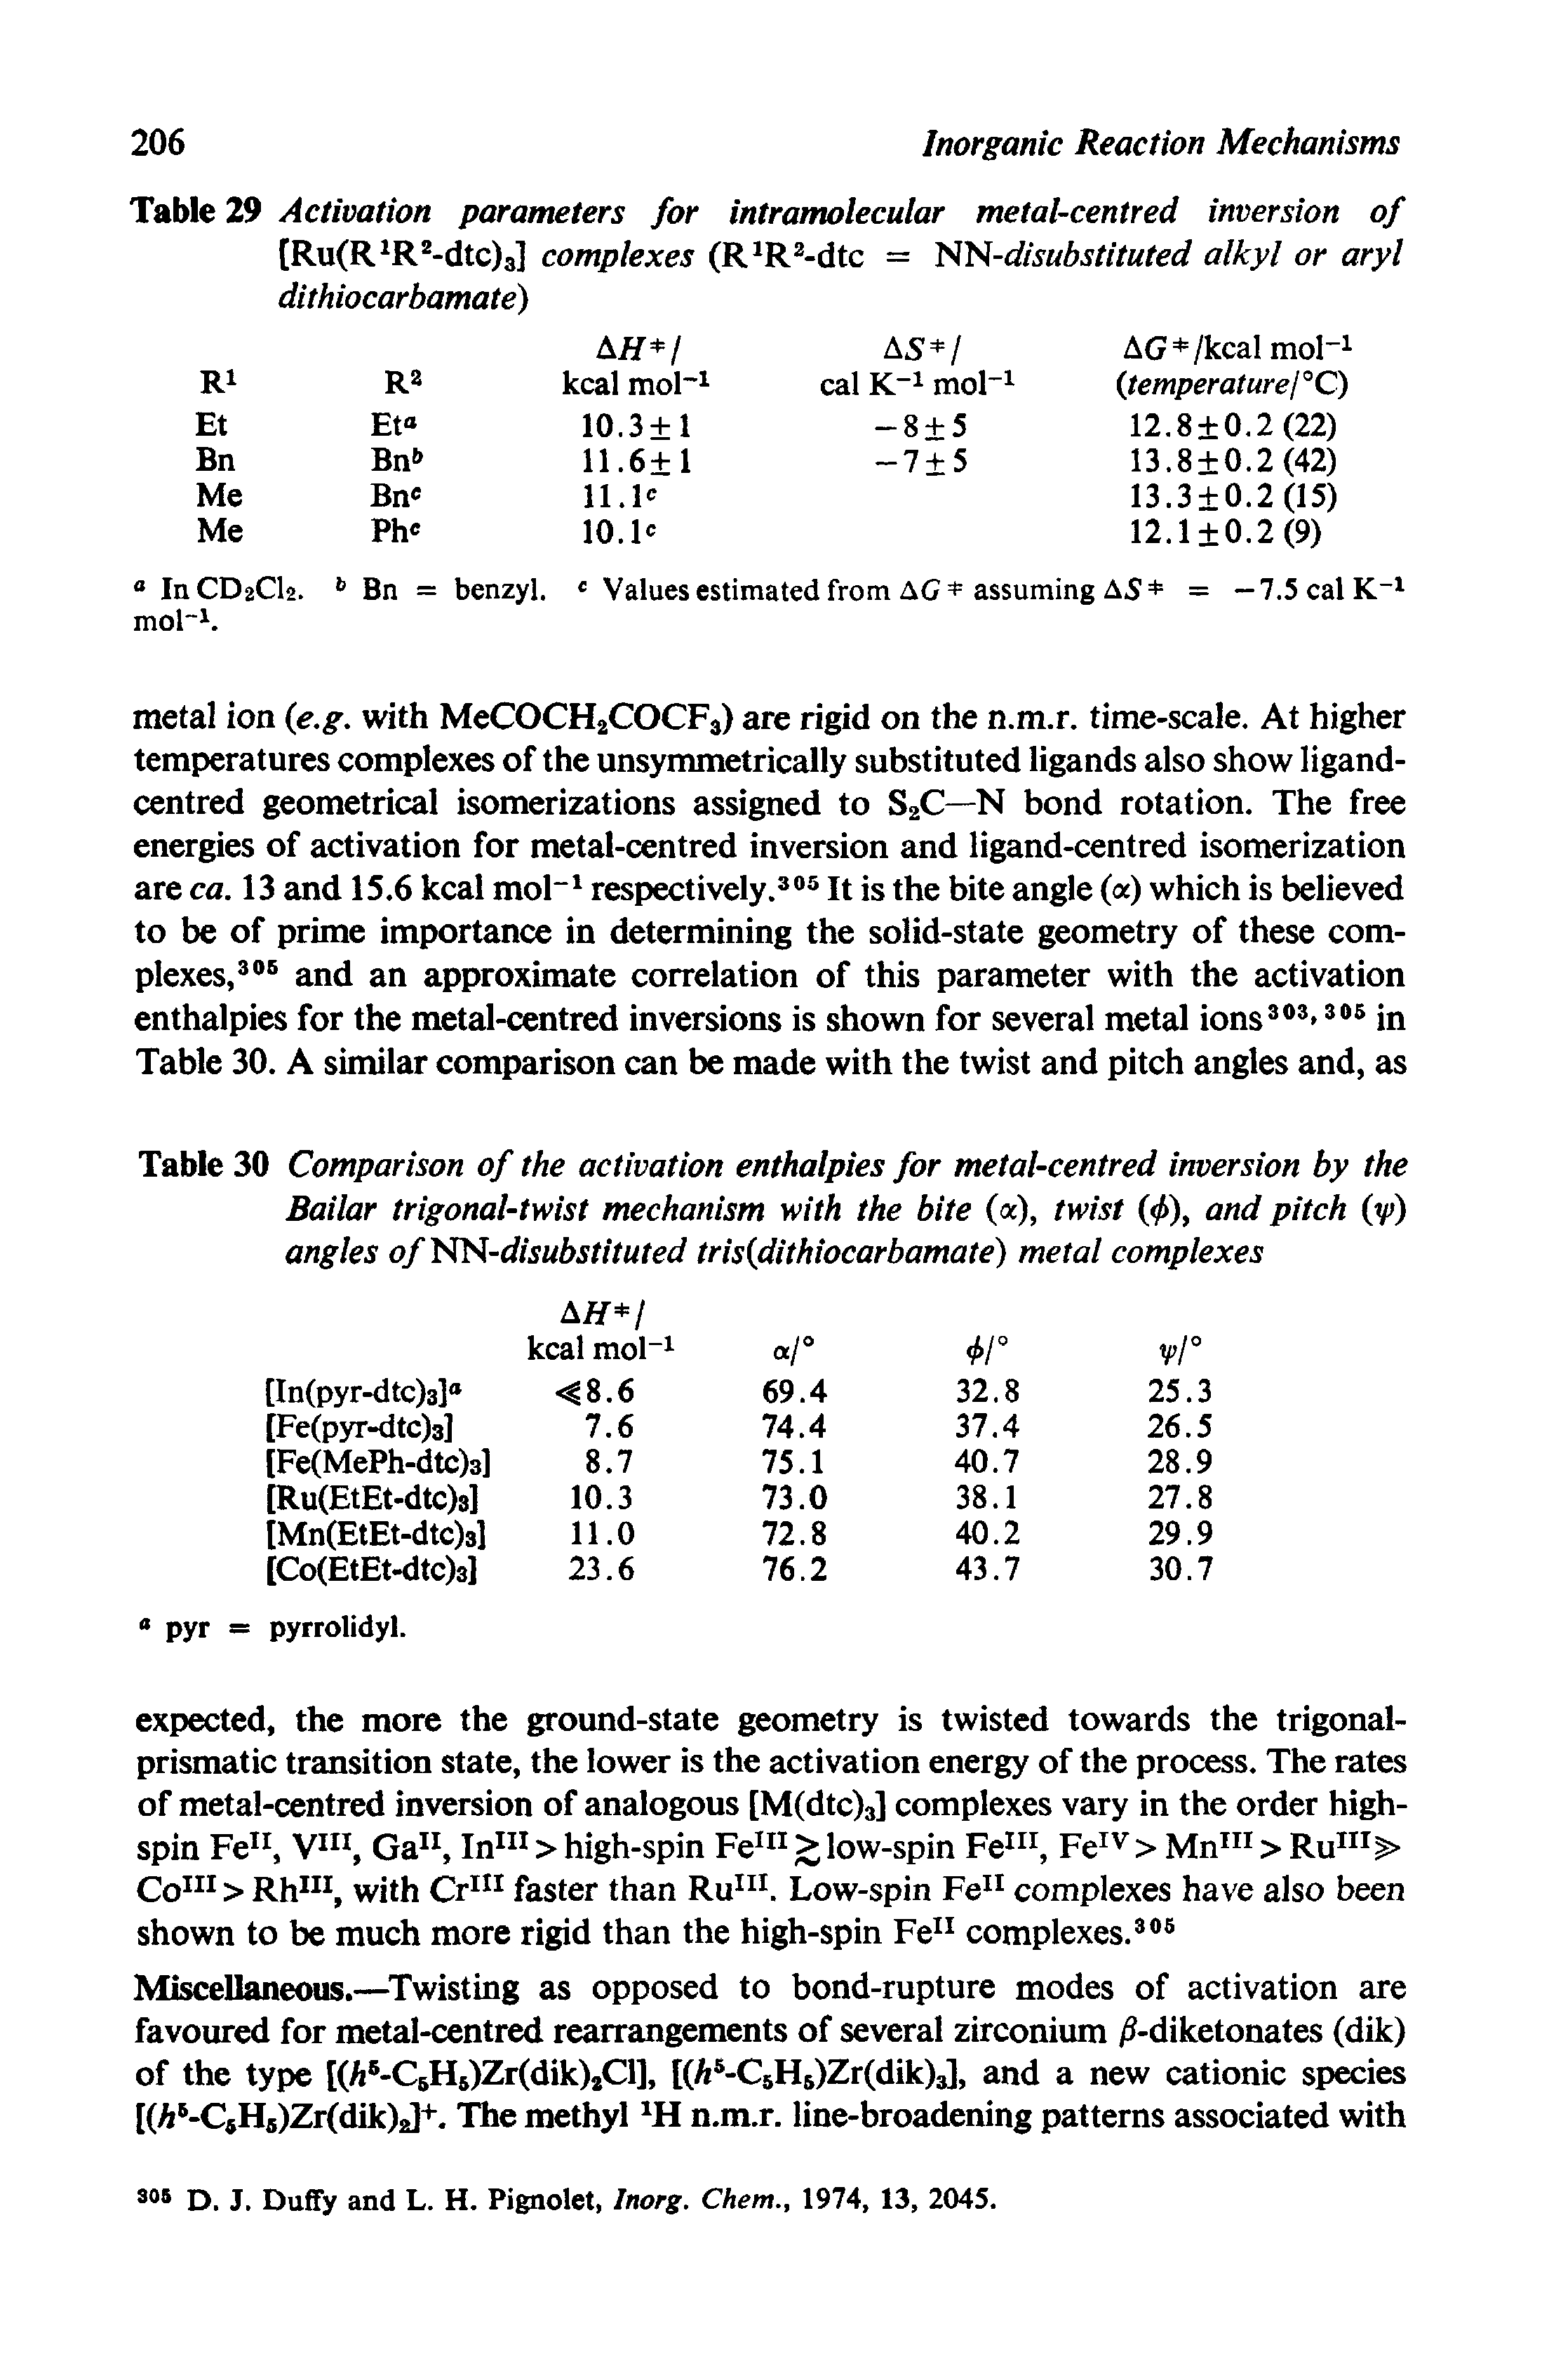 Table 30 Comparison of the activation enthalpies for metal-centred inversion by the Bailor trigonal-twist mechanism with the bite (a), twist ( ), and pitch (y>) angles ofNN-disubstituted tris(dithiocarbamate) metal complexes...